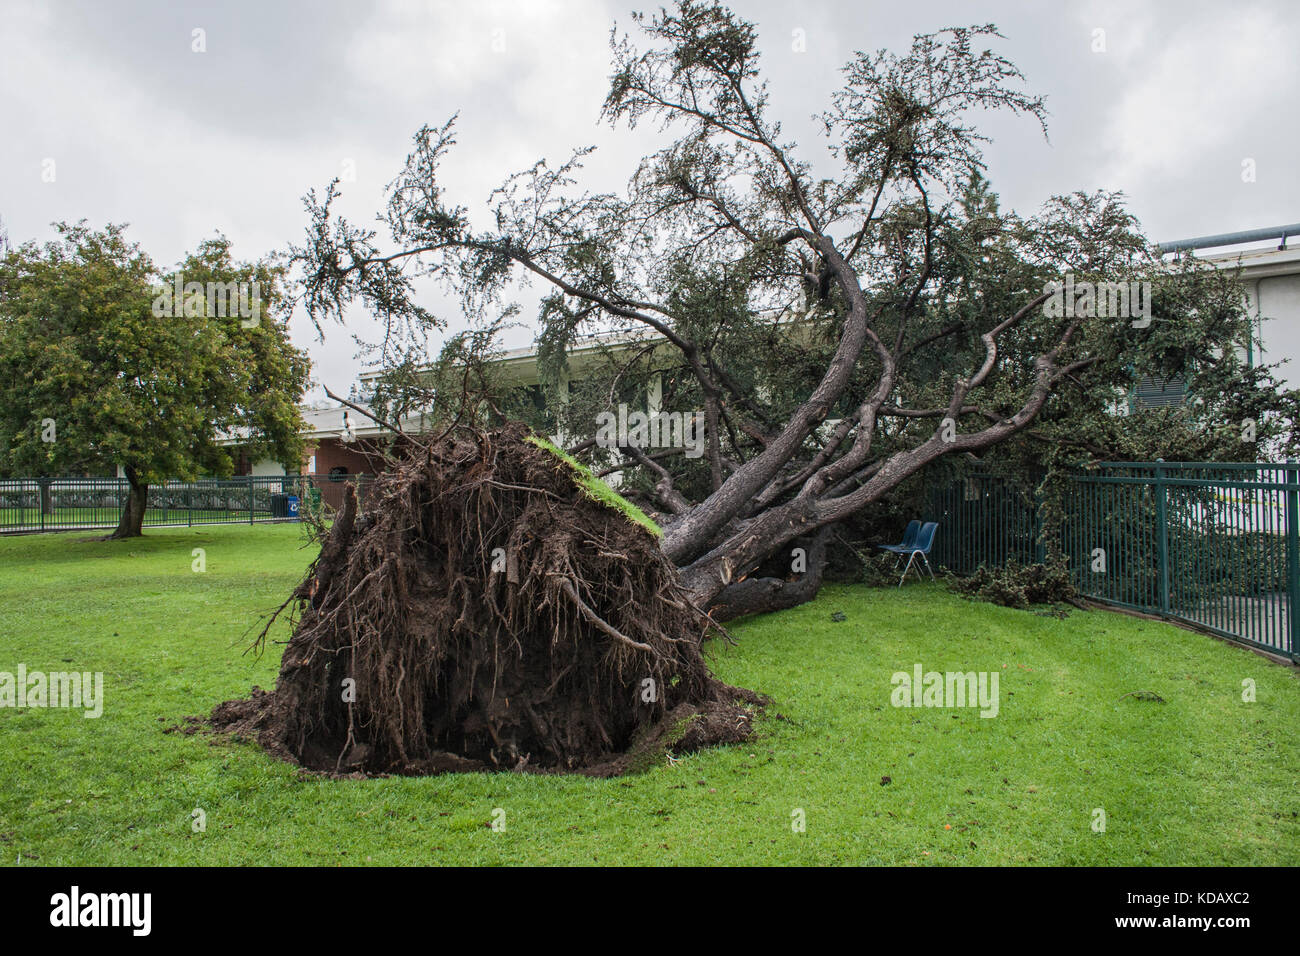 Tree felled by heavy winds in front of Farragut Elementary School, Culver City, Los Angeles, California, USA Stock Photo